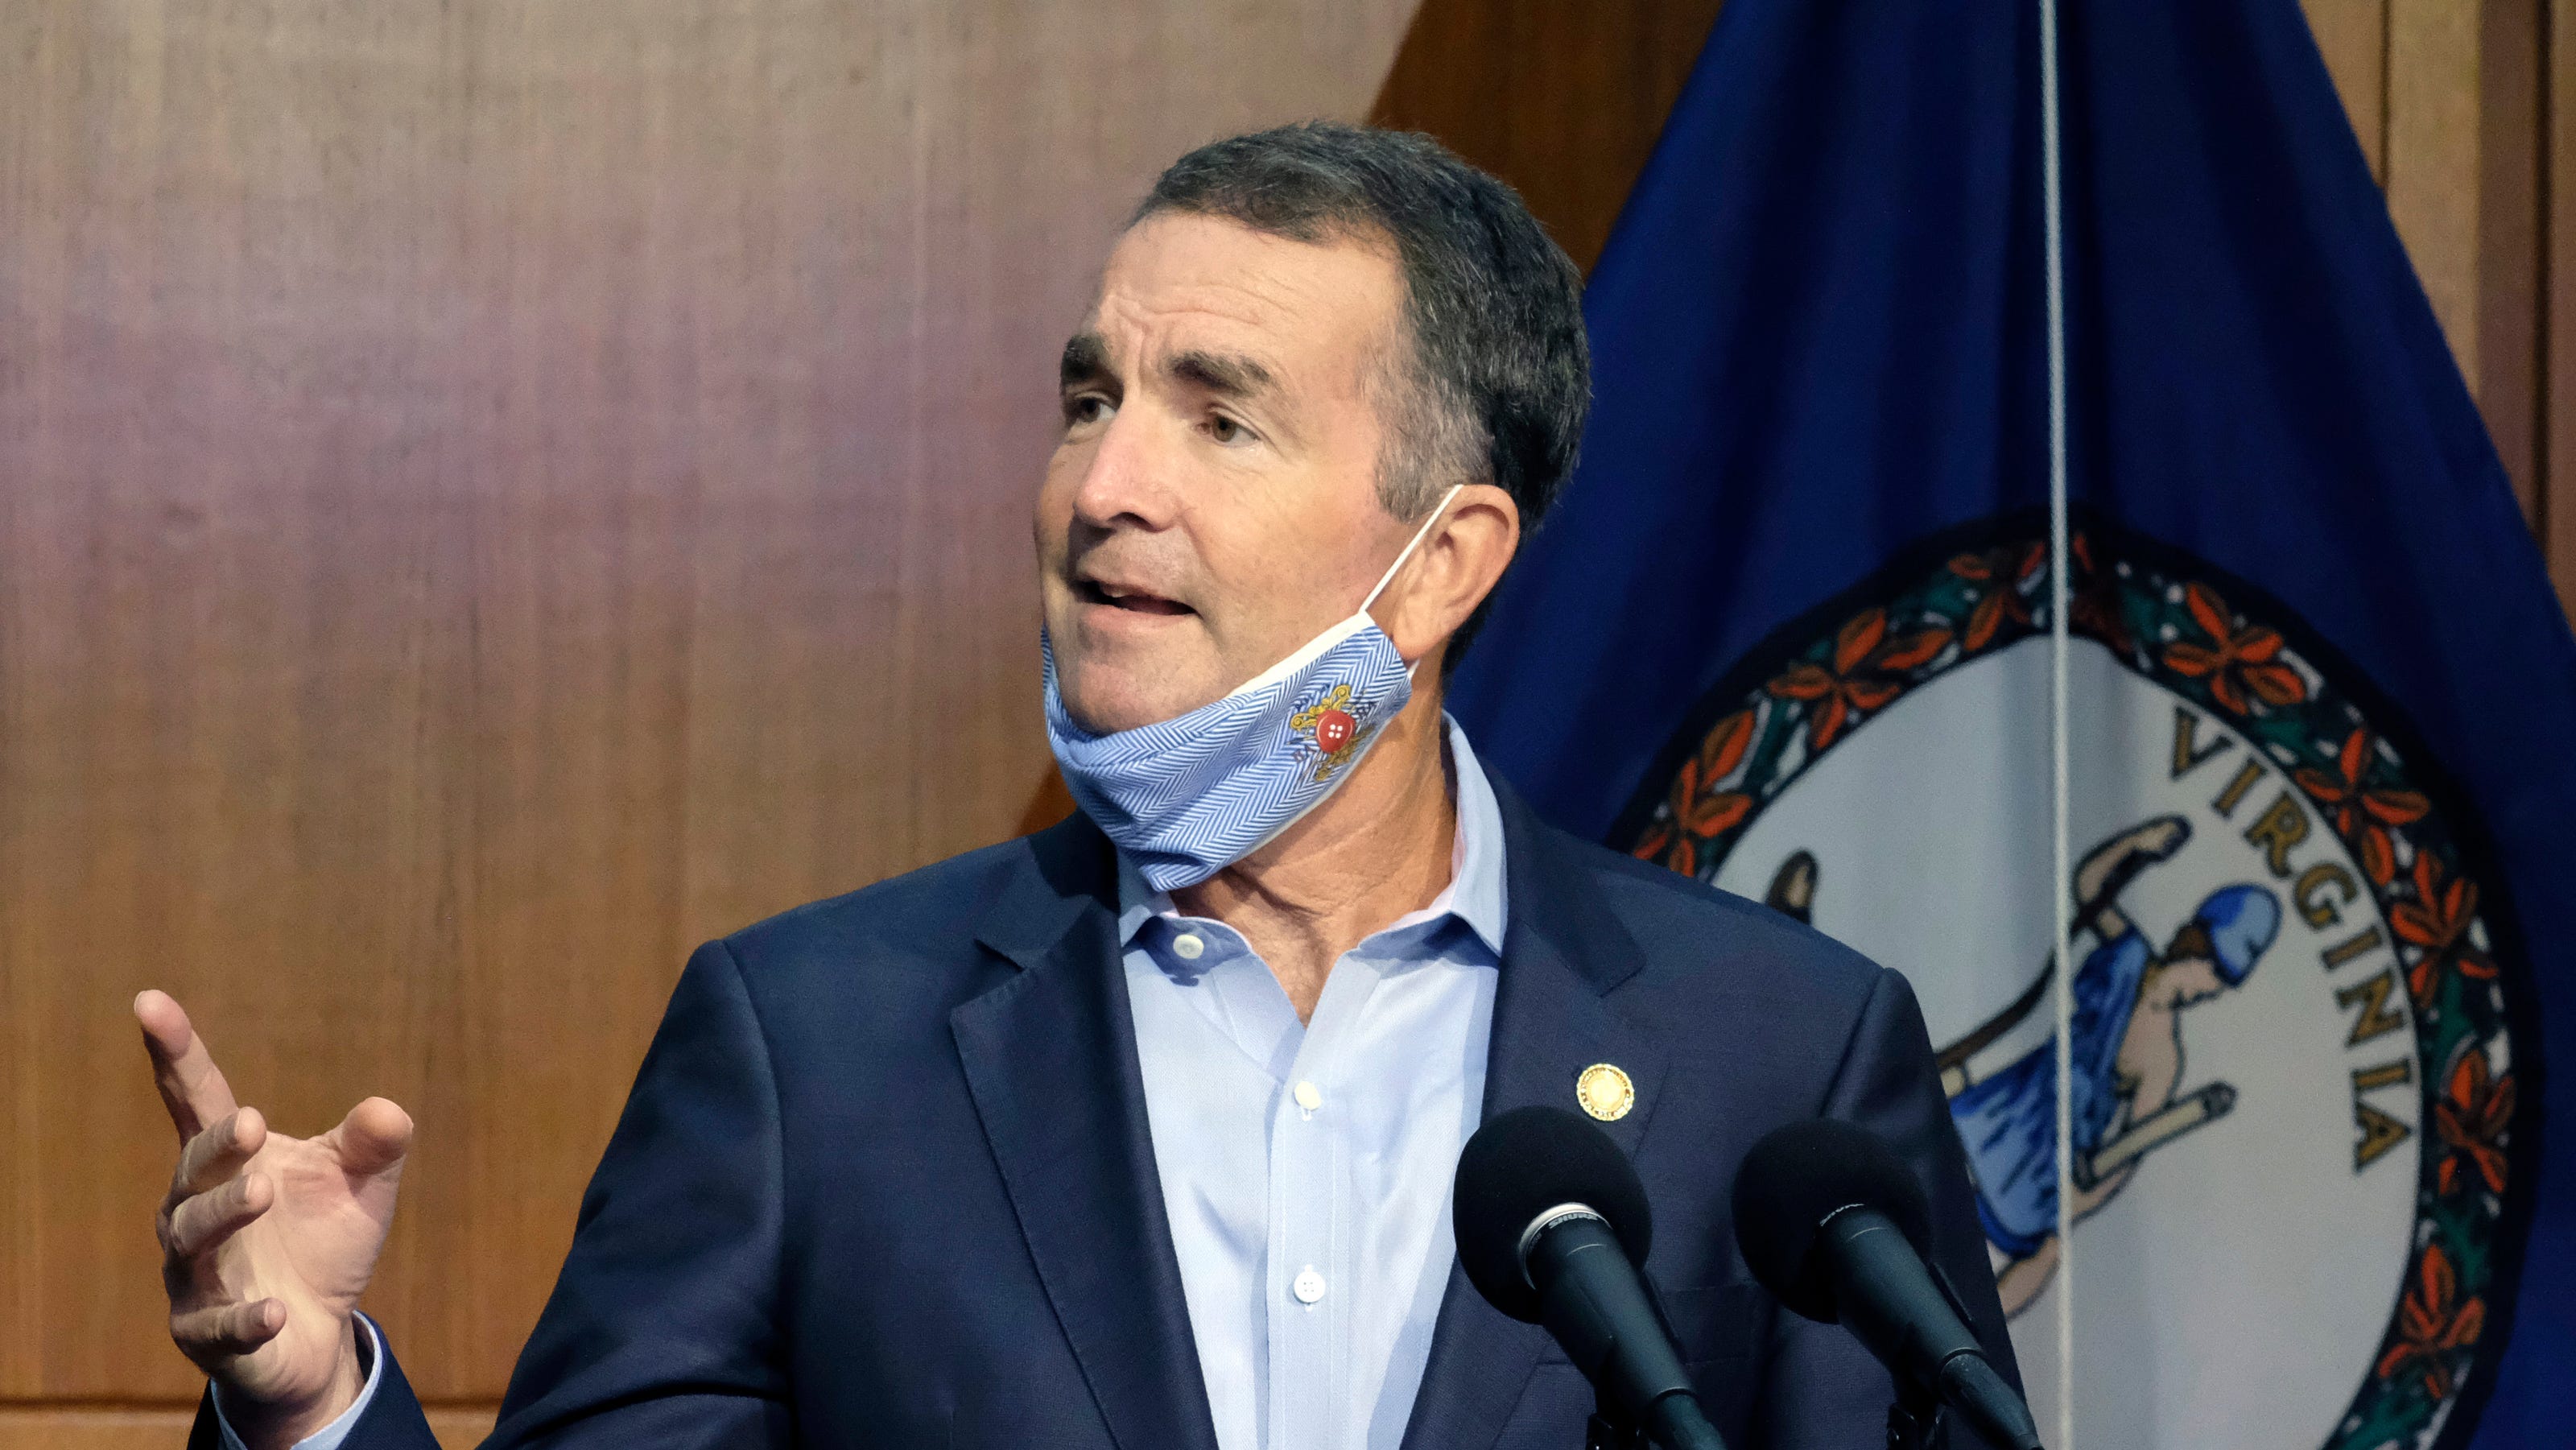 FBI says Virginia Gov. Northam was also targeted in plot to kidnap Michigan Gov. Whitmer